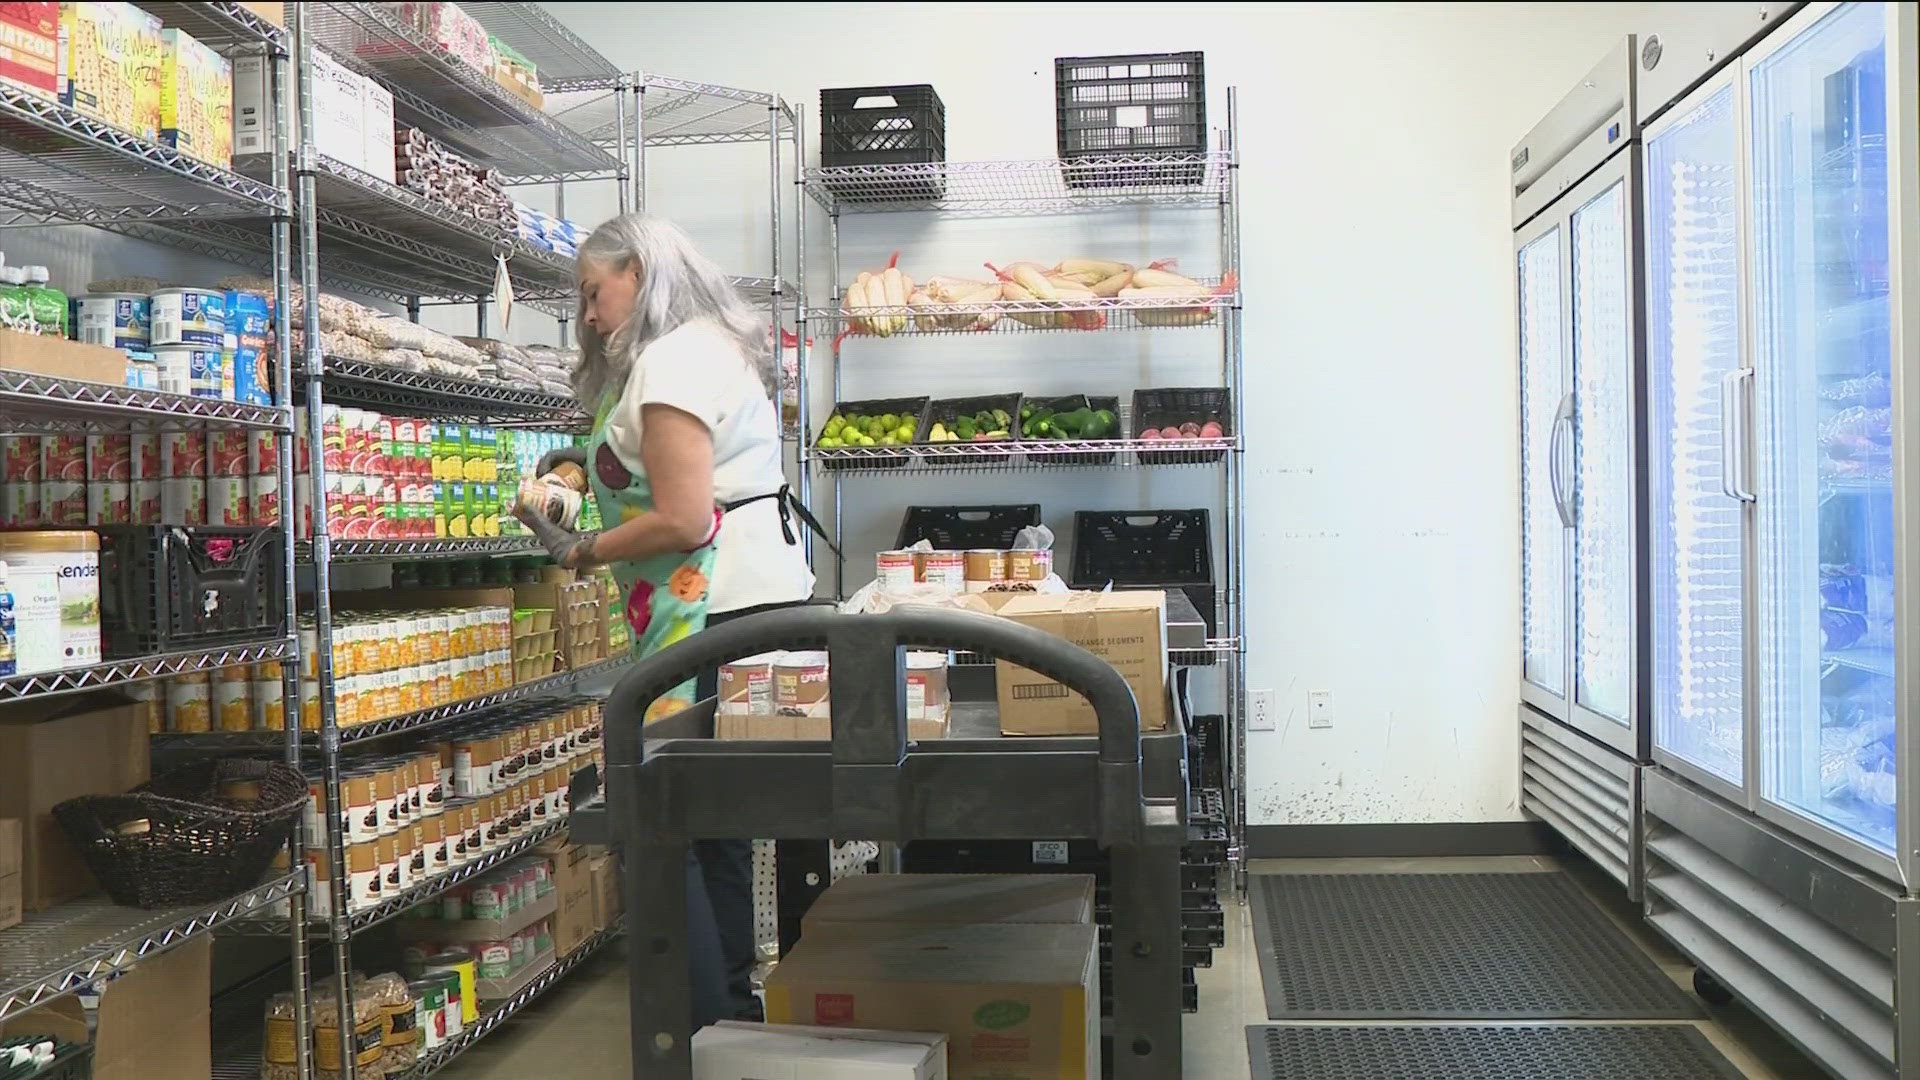 The new partnership offers job resources for those getting a meal at the food bank.